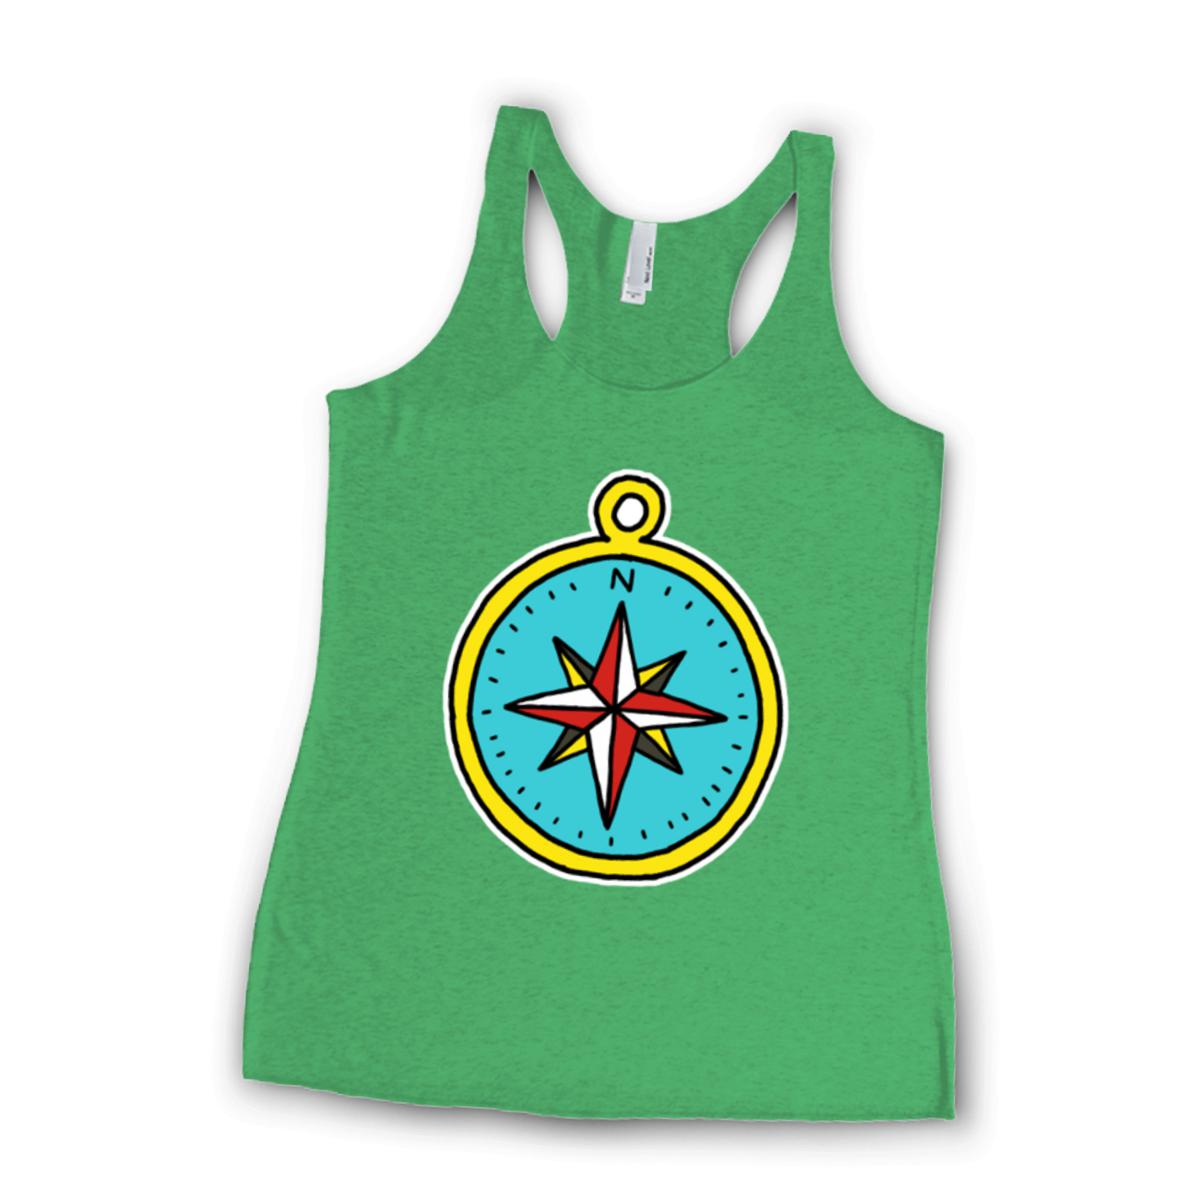 American Traditional Compass Ladies' Racerback Tank Small envy-green